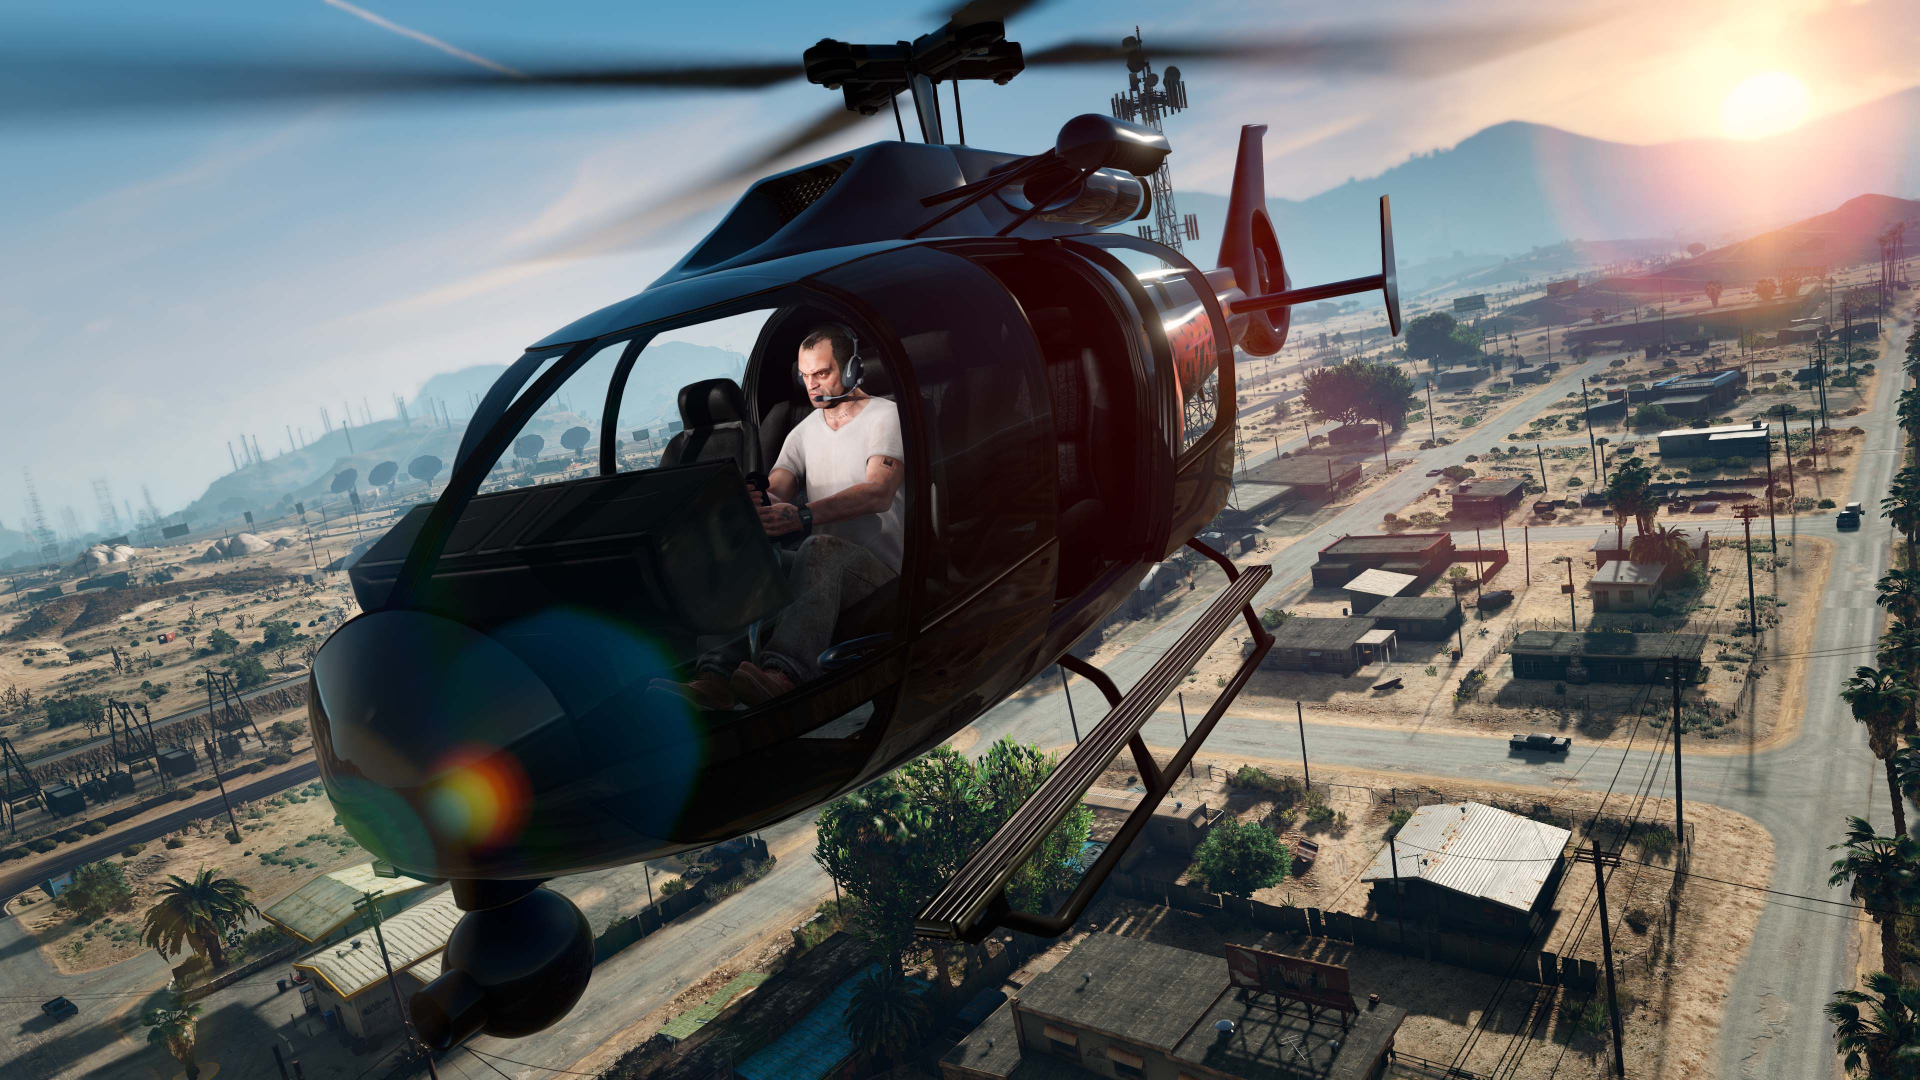 GTA 5 cheats, codes, and phone numbers